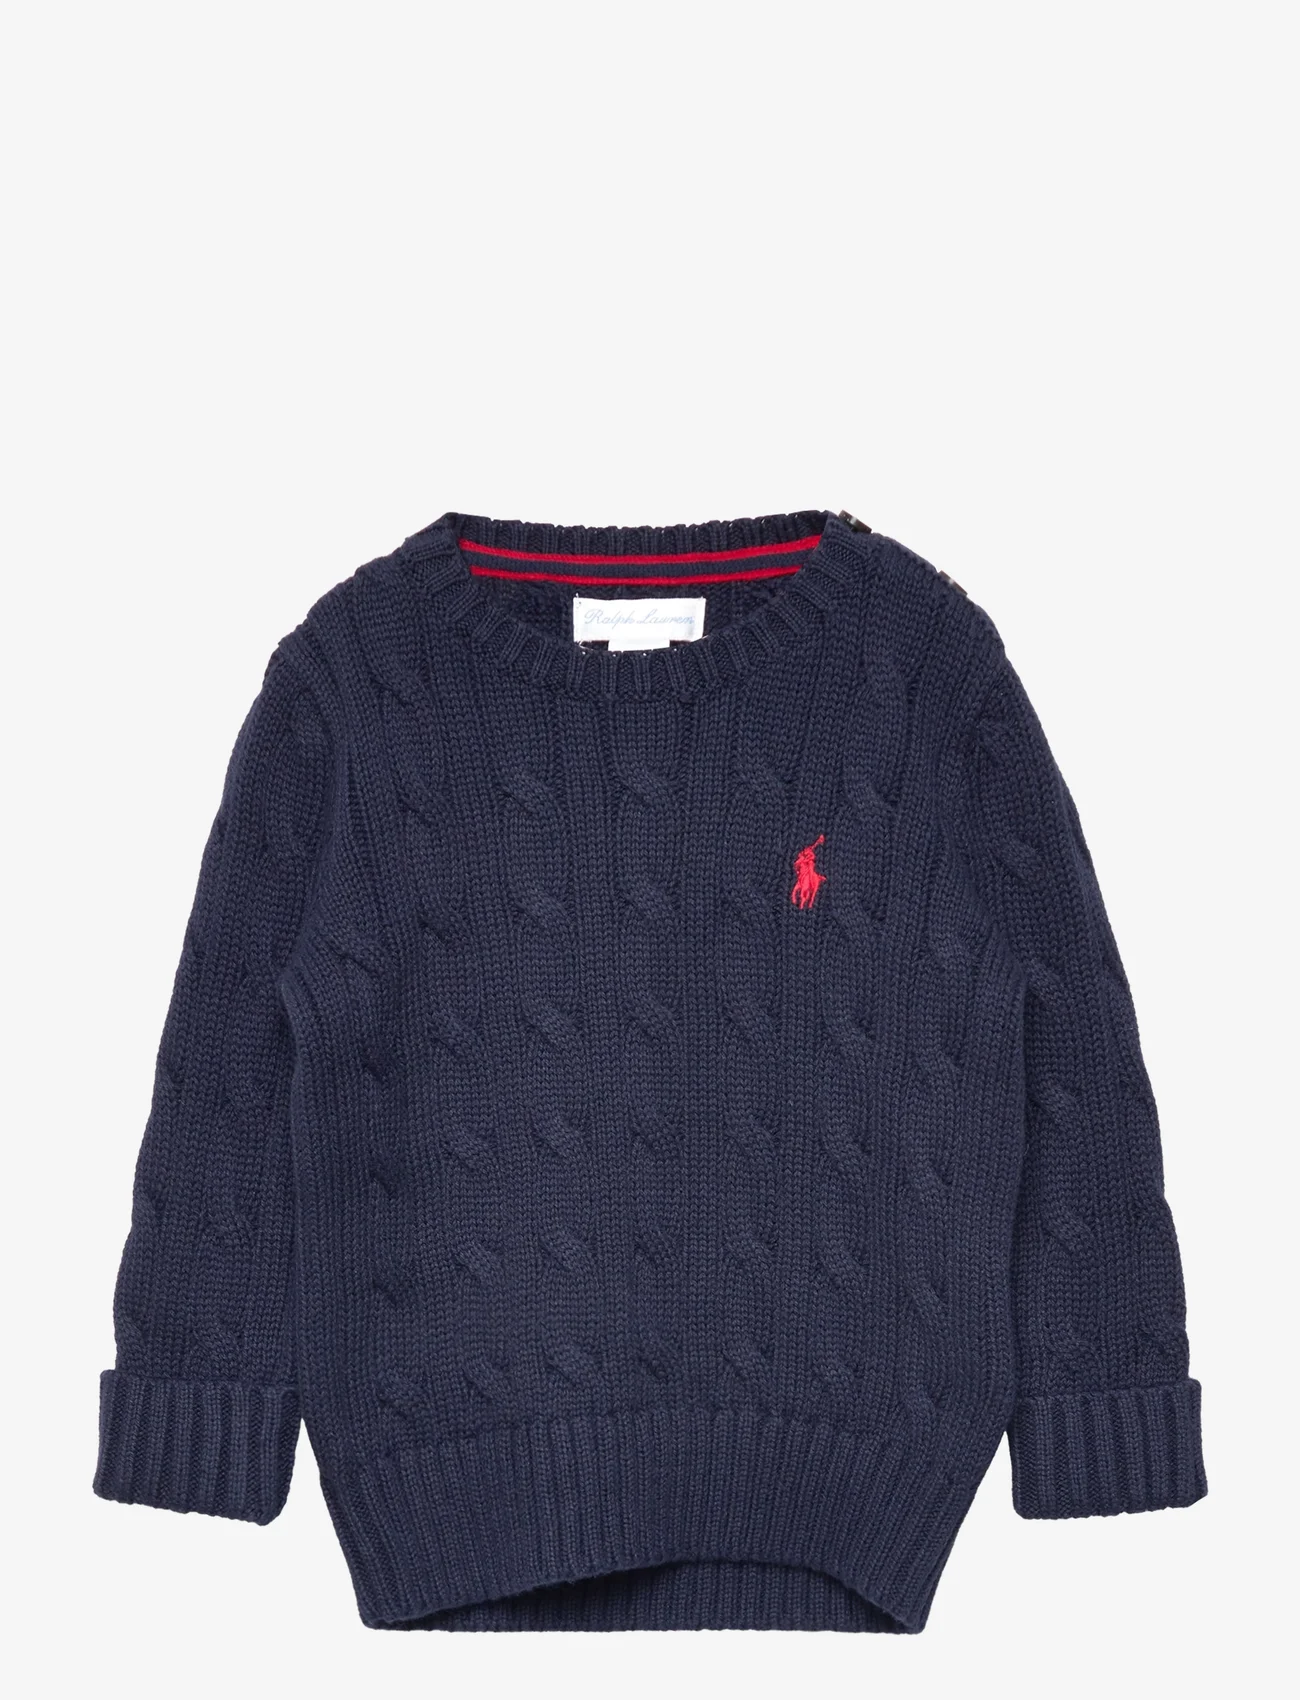 Ralph Lauren Baby - Cable-Knit Cotton Sweater - rl navy/c3822 - 0